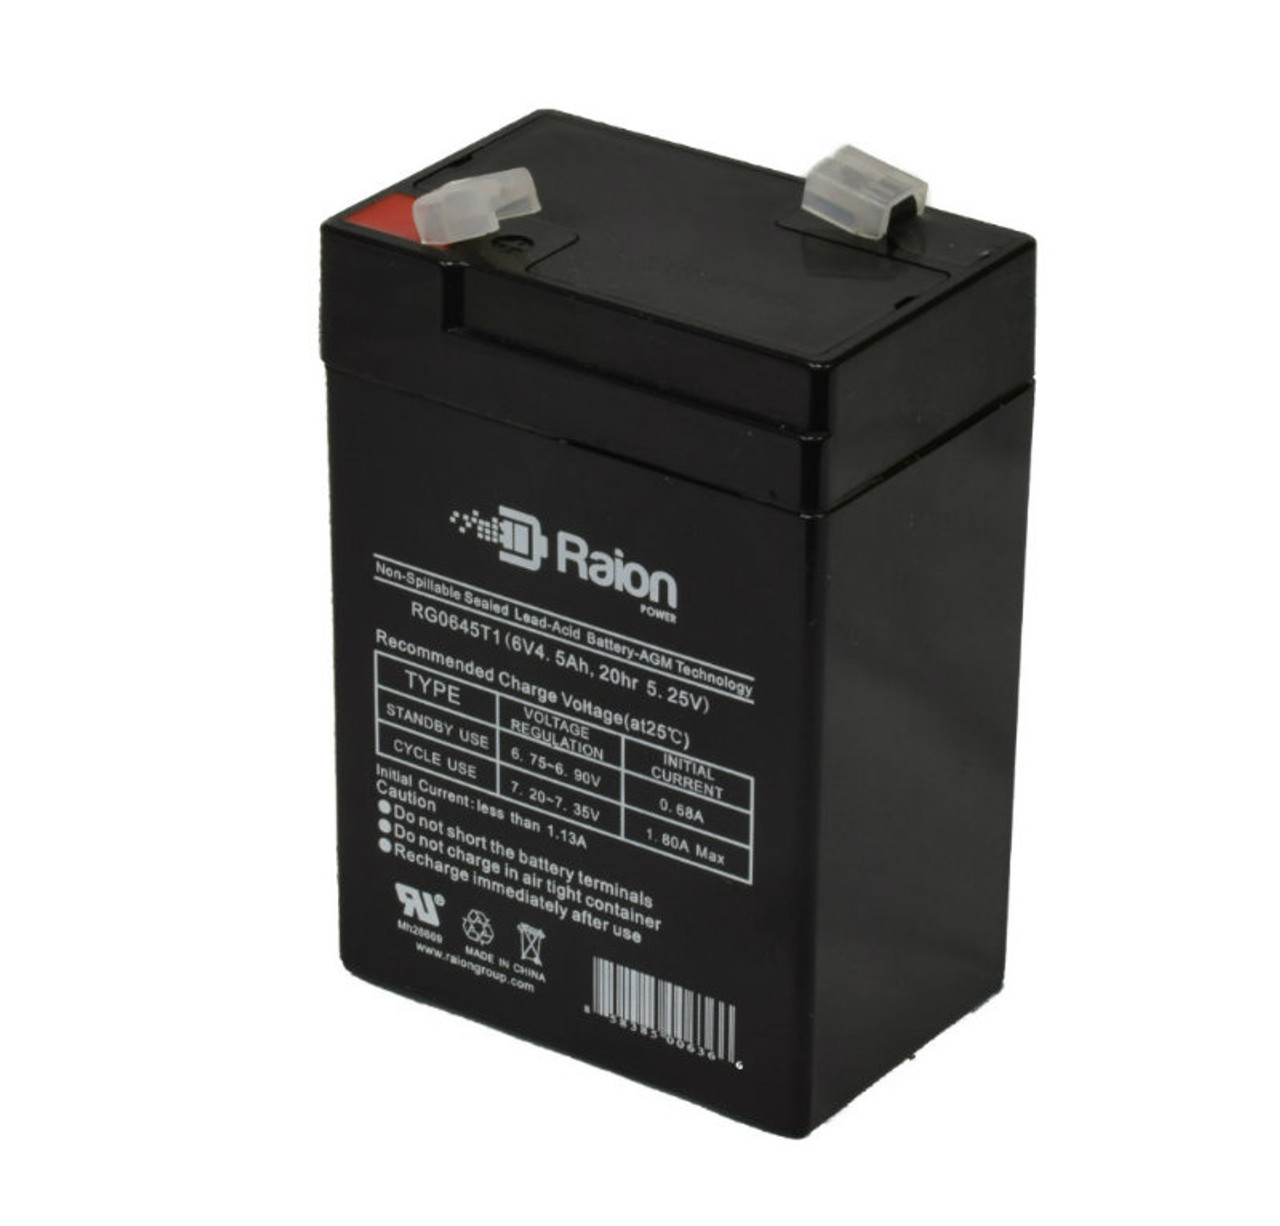 Raion Power RG0645T1 6V 4.5Ah Replacement Battery Cartridge for Kung Long WP4.5-6WL